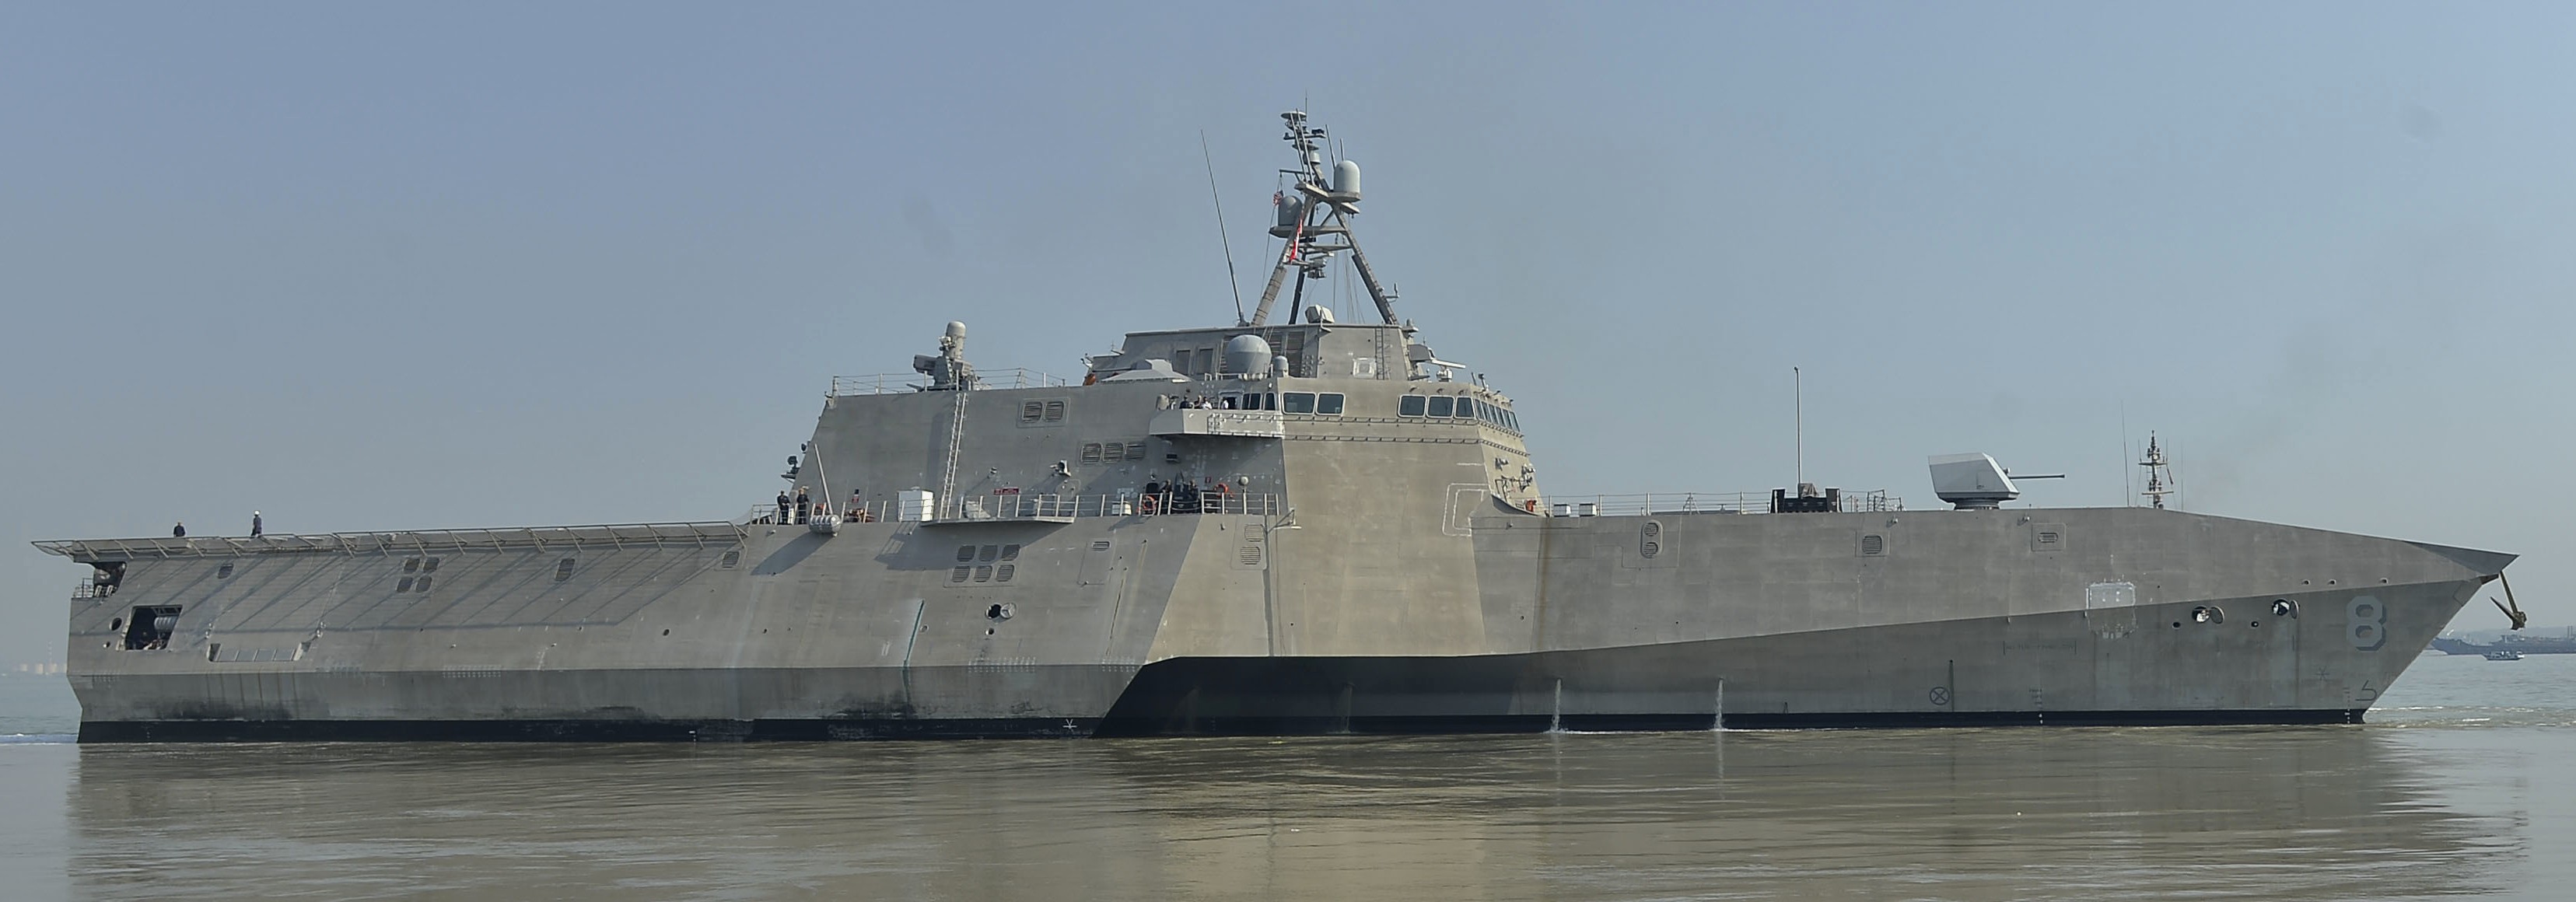 lcs-8 uss montgomery independence class littoral combat ship us navy 38 tanjung perak port indonesia